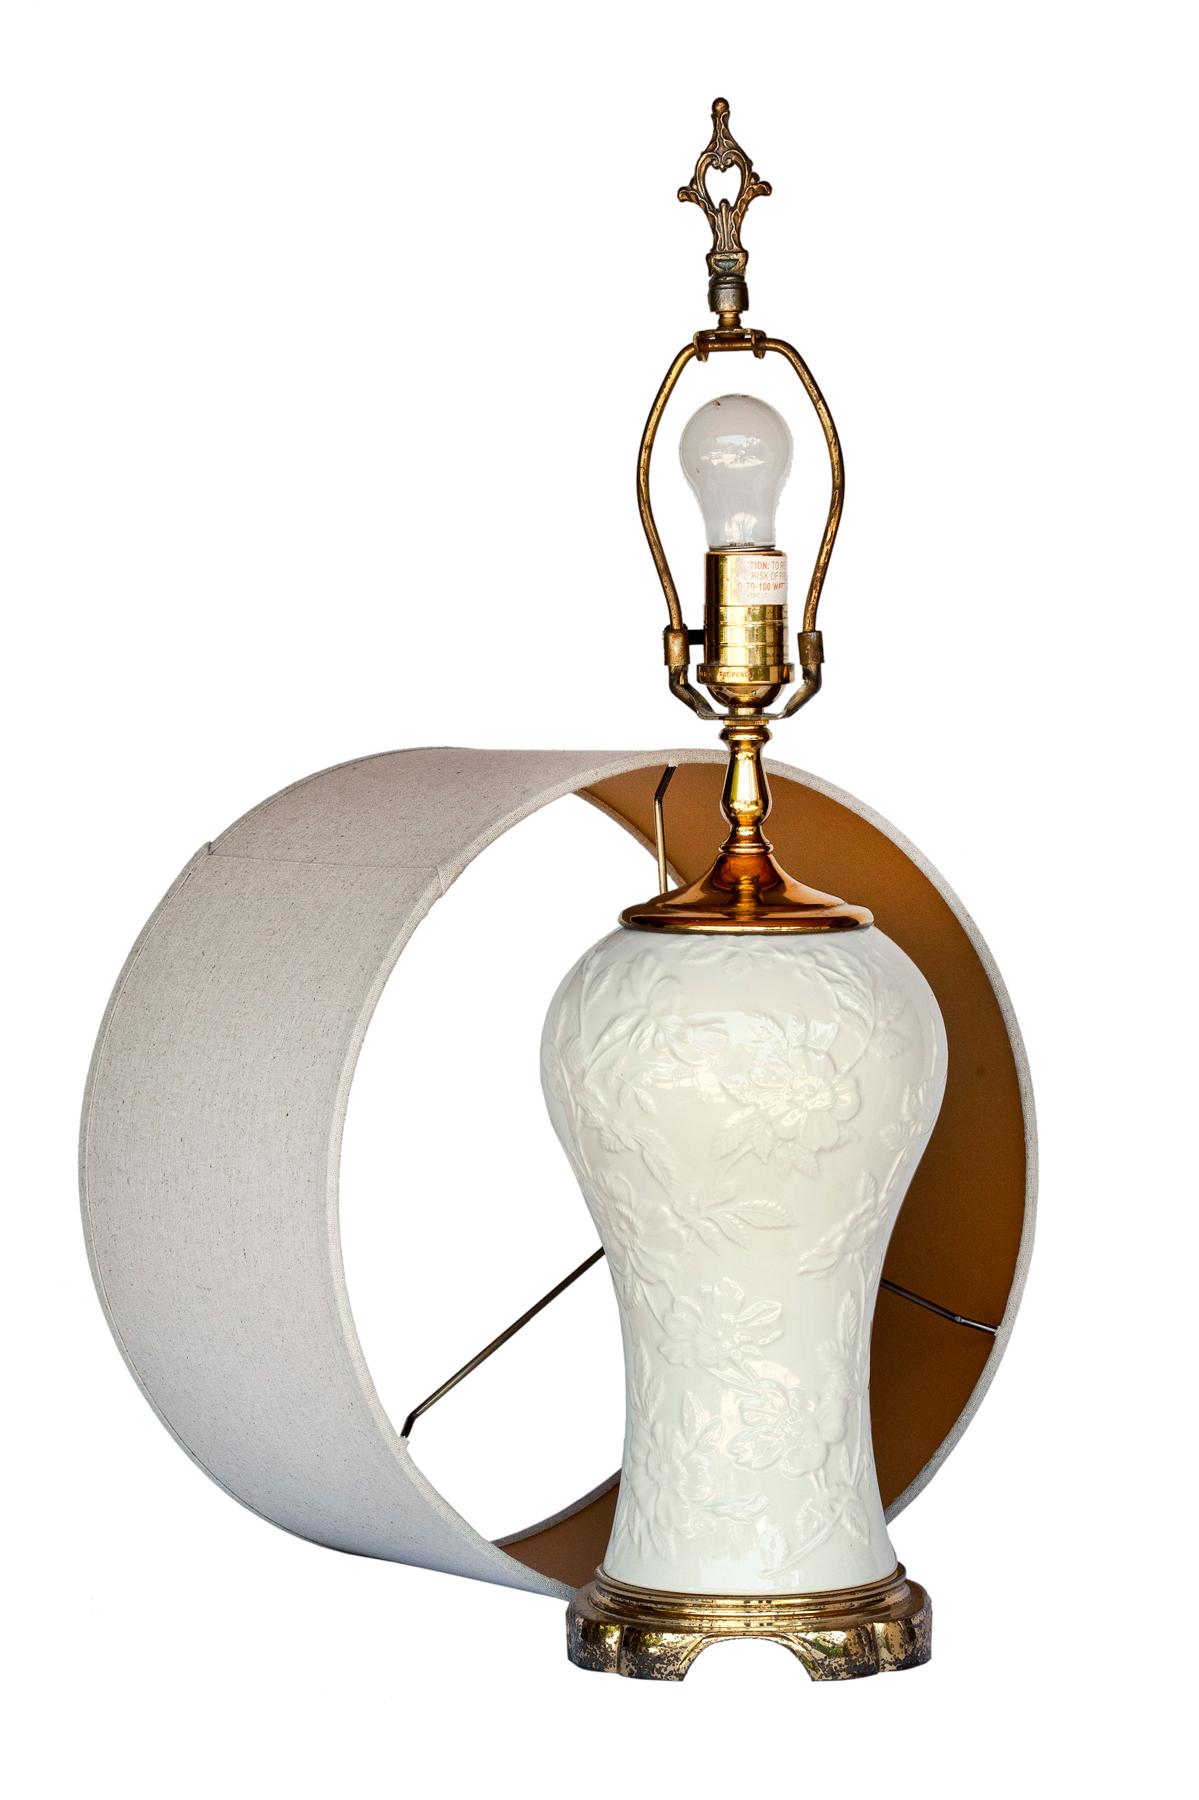 Waterford Blanc de Chine ginger jar lamp on a simple brass base. Lamp has an Asian flair. The linen shade is not included. 
Lovely brass finial.